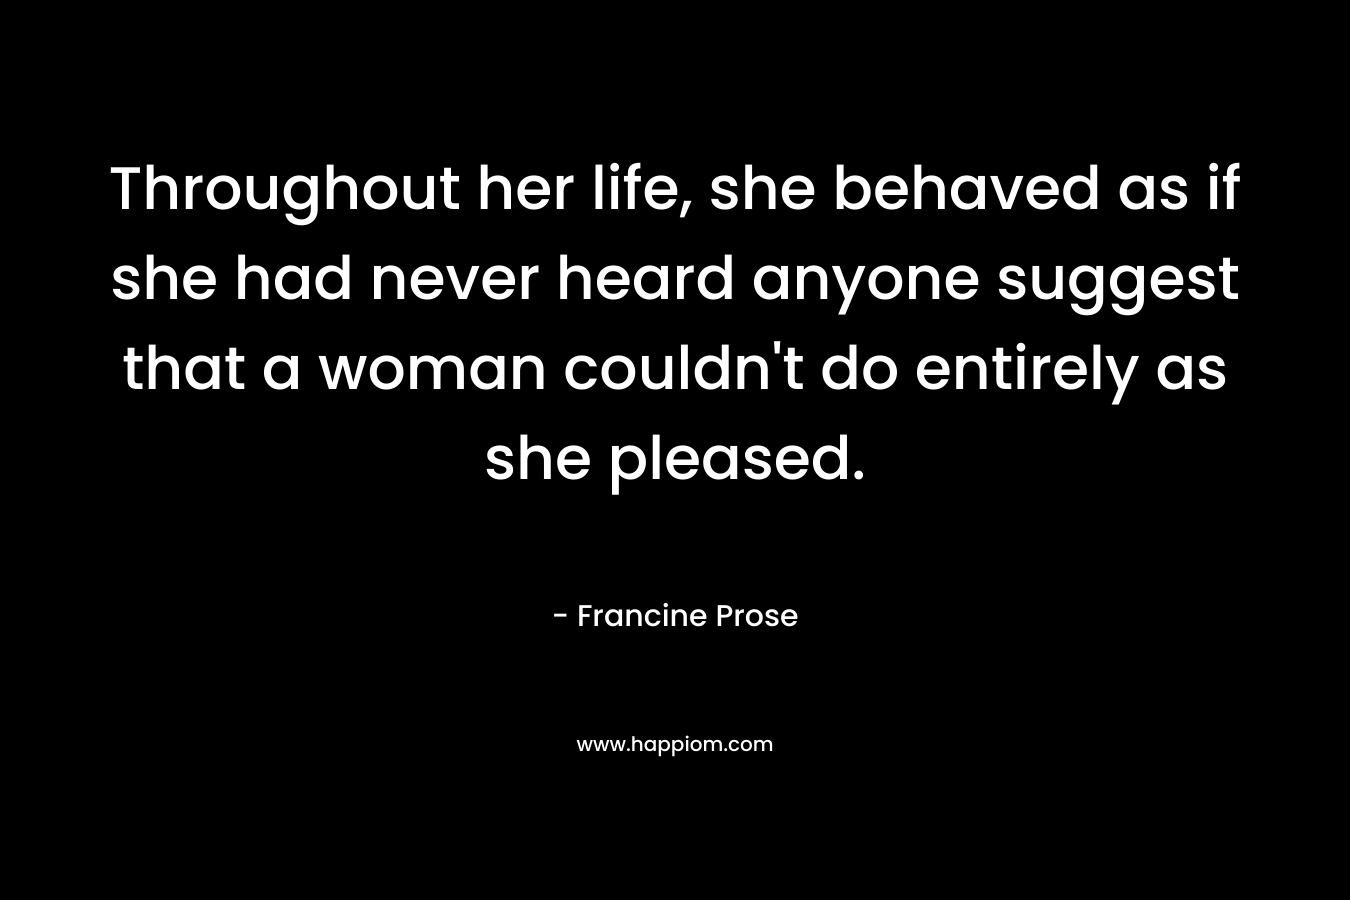 Throughout her life, she behaved as if she had never heard anyone suggest that a woman couldn’t do entirely as she pleased. – Francine Prose